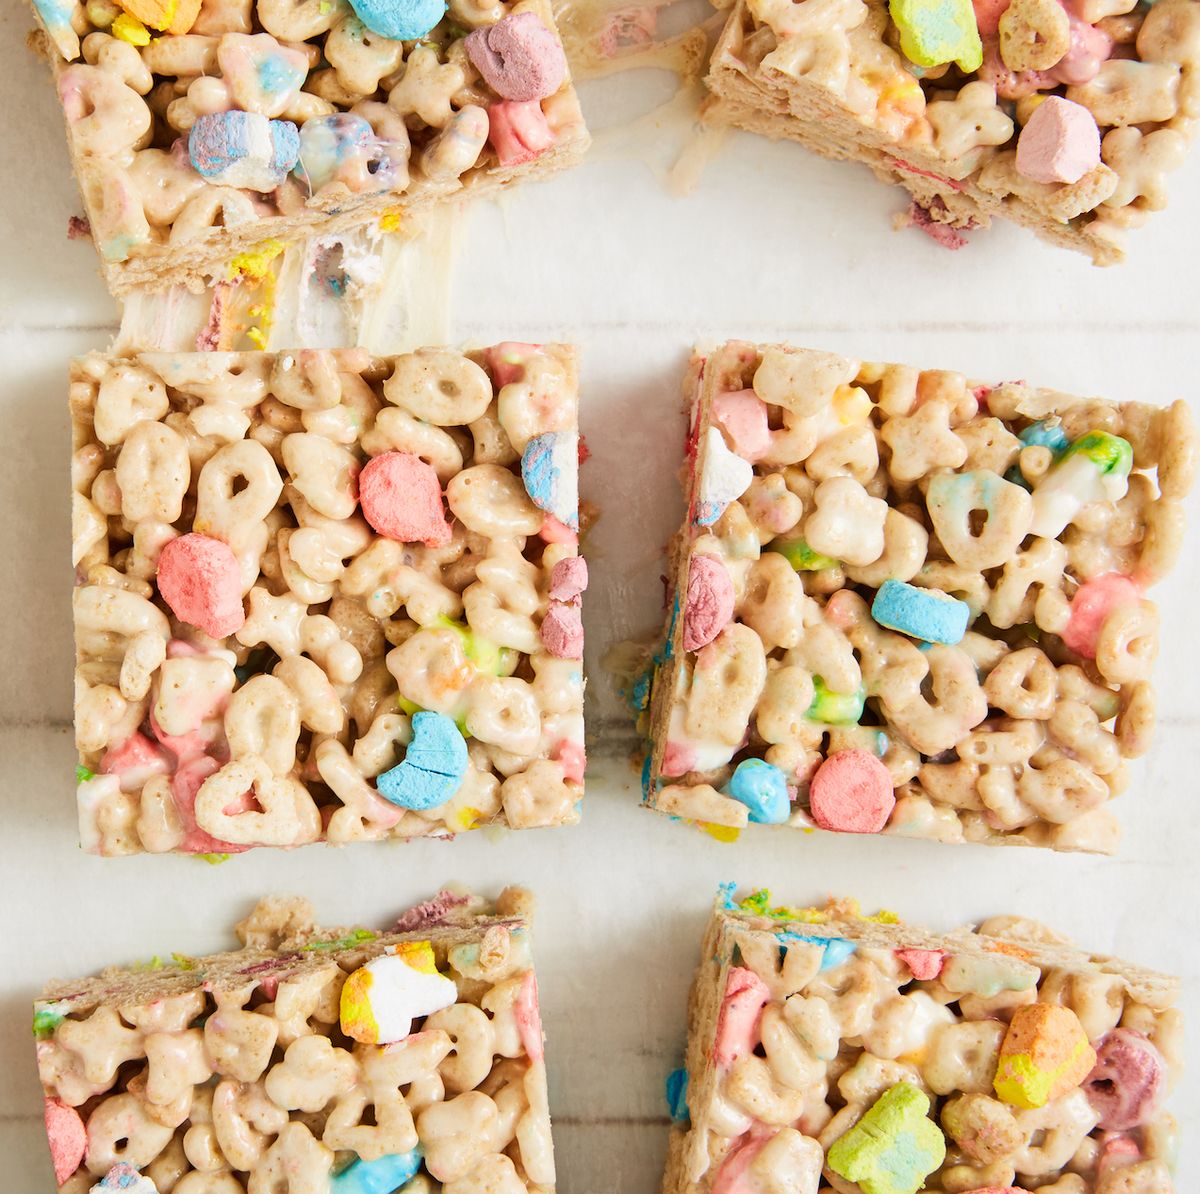 Best Lucky Charms Bars Recipe - How To Make Lucky Charms Bars